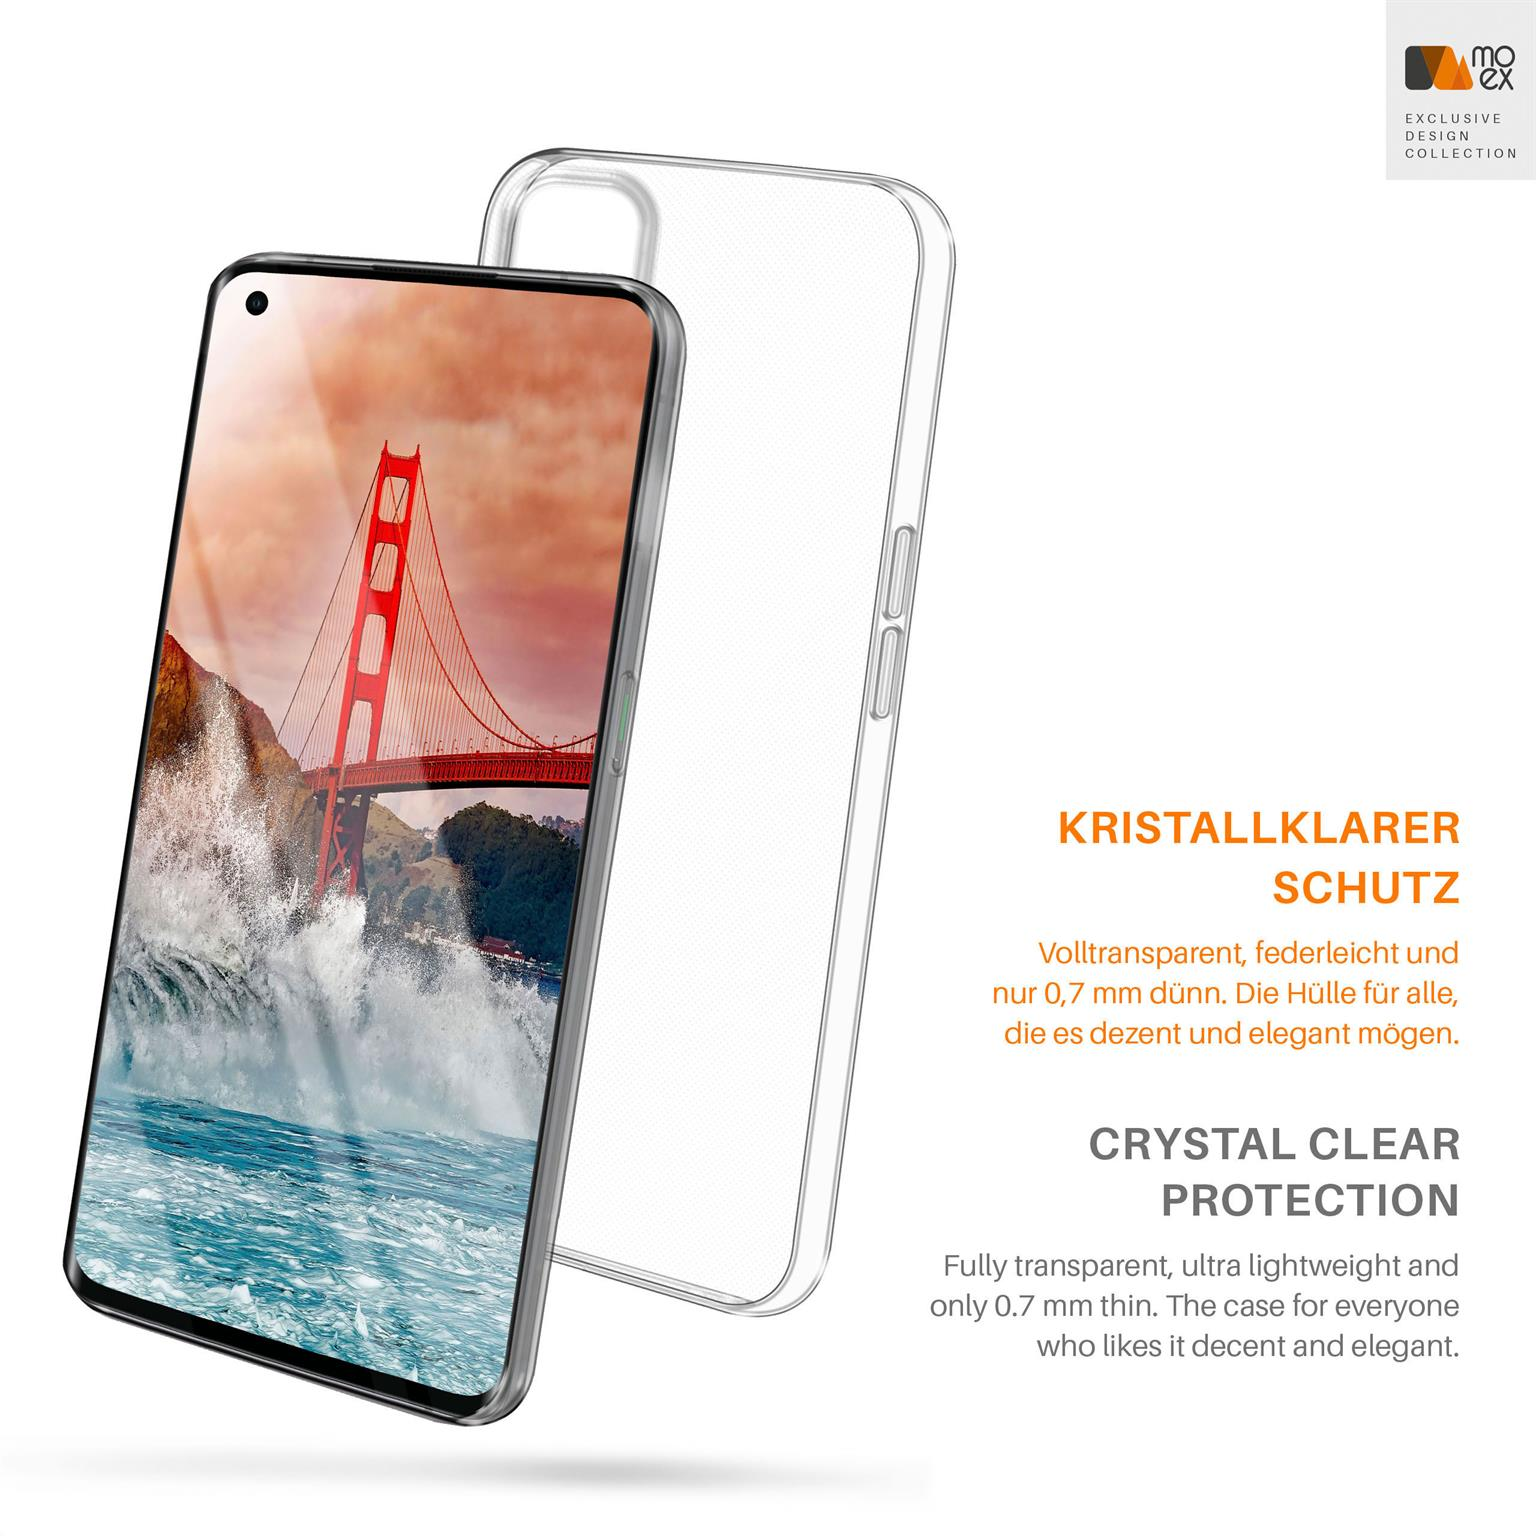 Backcover, Pro Aero Oppo, Crystal-Clear Case, 5G, Reno4 MOEX